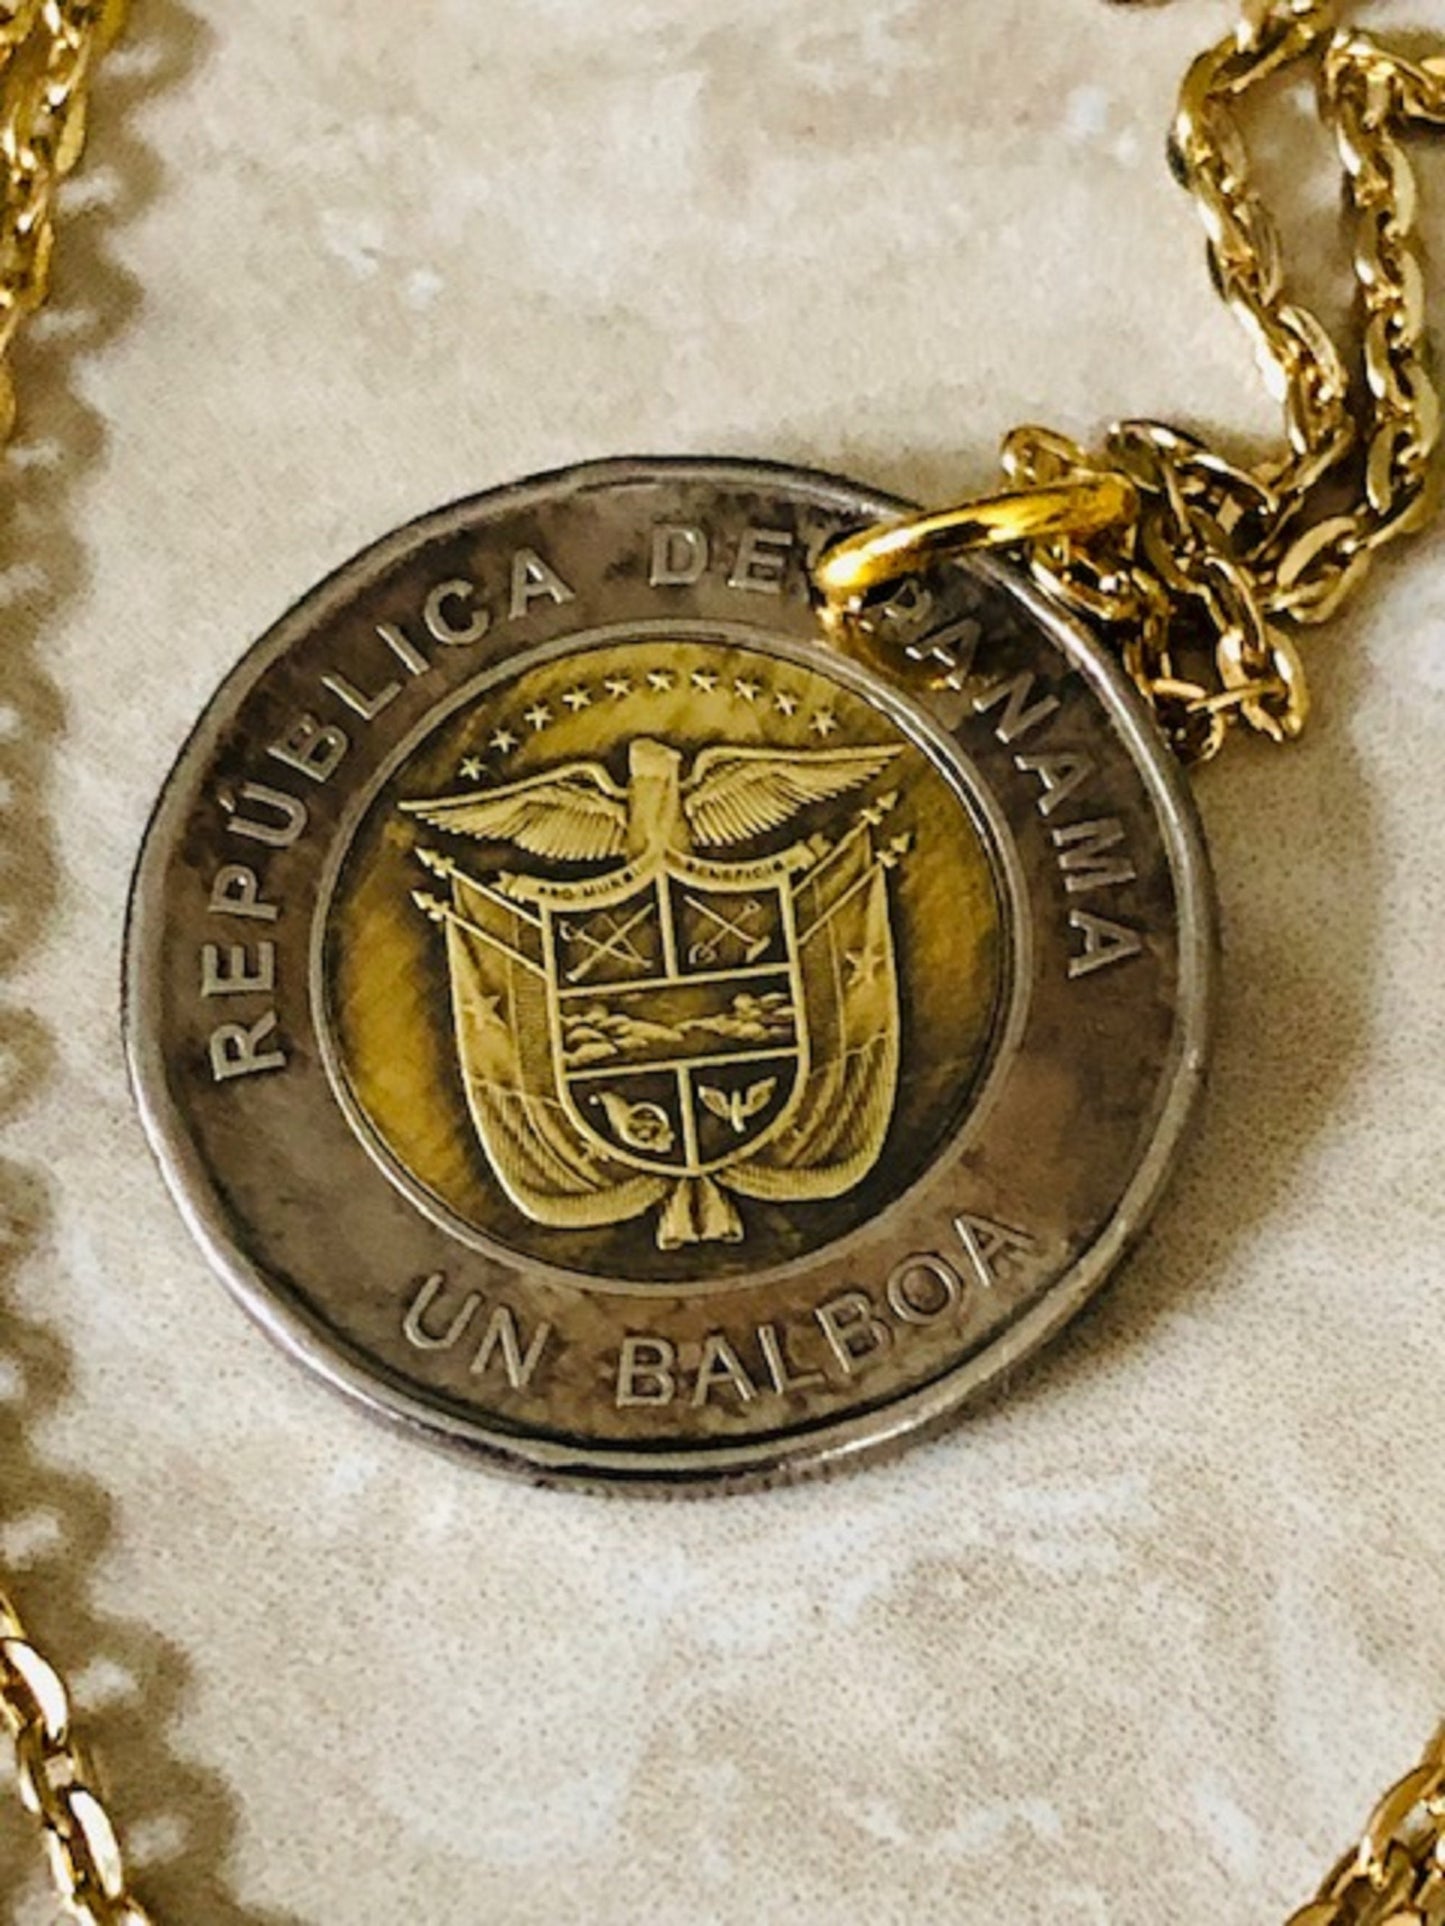 Panama Coin Necklace Santa Maria Basilica Panamanian Personal Vintage Handmade Jewelry Gift Friend Charm For Him Her World Coin Collector